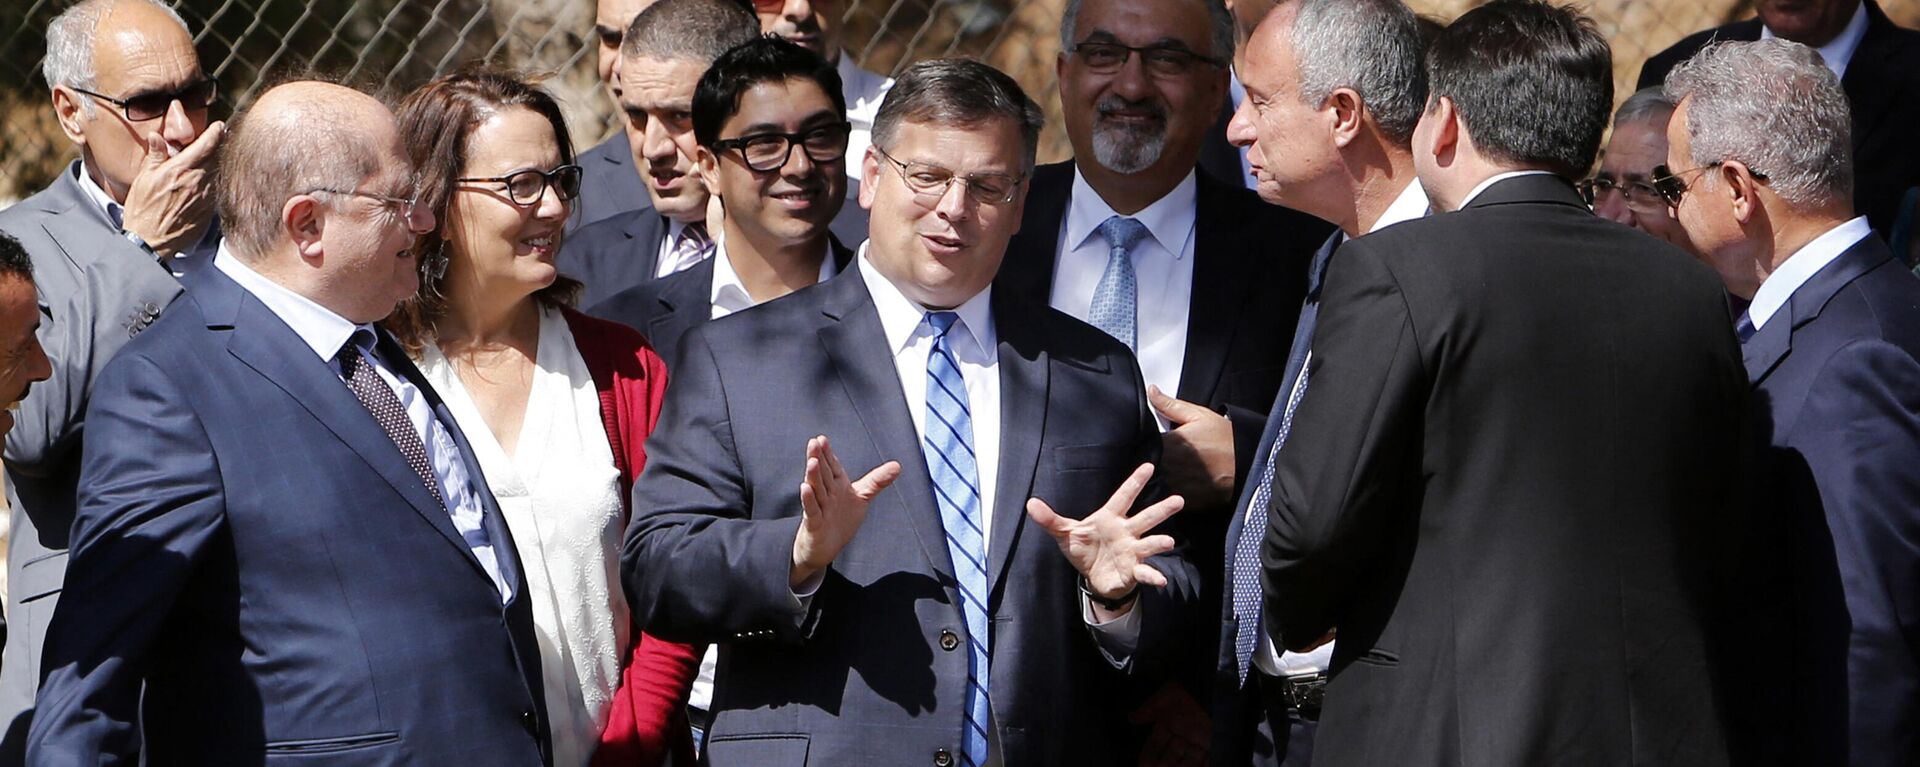 Donald Blome (C), US Consul General in Jerusalem, talks to senior Palestinian officials and dignitaries during the launch of a conservation project to preserve the Solomon's Pools in the West Bank town of Bethlehem, on October 10, 2017. The 750,000 USD program will help protect this historic site damaged in recent years by erosion to support tourism and the Palestinian economy in launching a major conservation project to protect and preserve the famous Solomon's Pools archaeological site in Bethlehem.  - Sputnik India, 1920, 26.09.2023